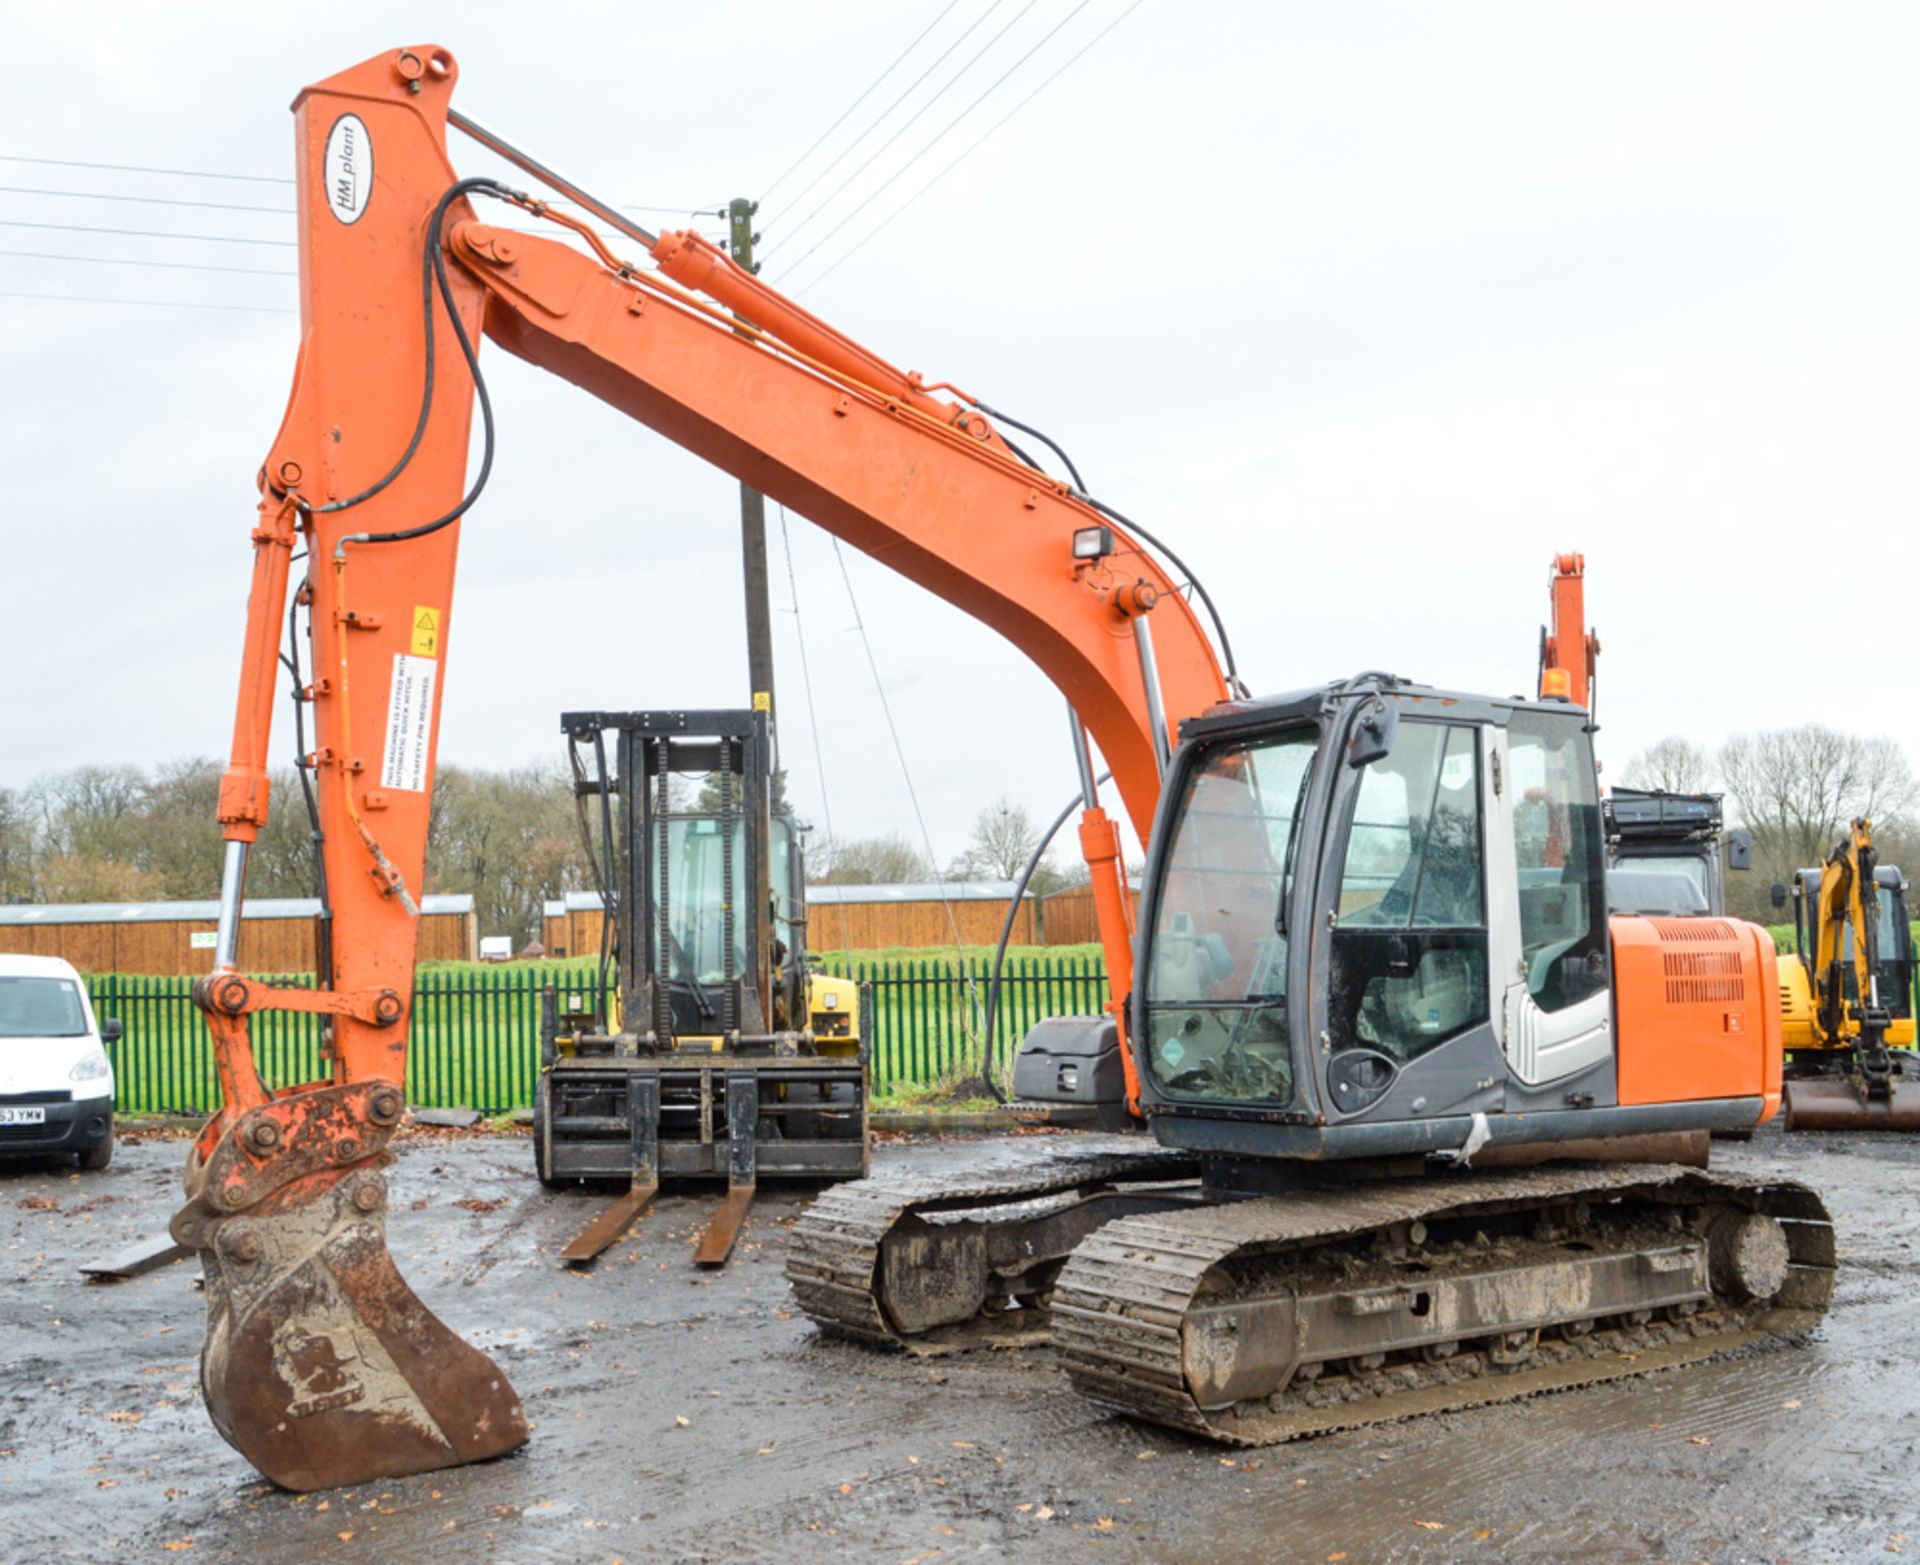 Hitachi Zaxis 130 LCN 13 tonne steel tracked excavator Year: 2010 S/N: 83263 Recorded Hours: 8982